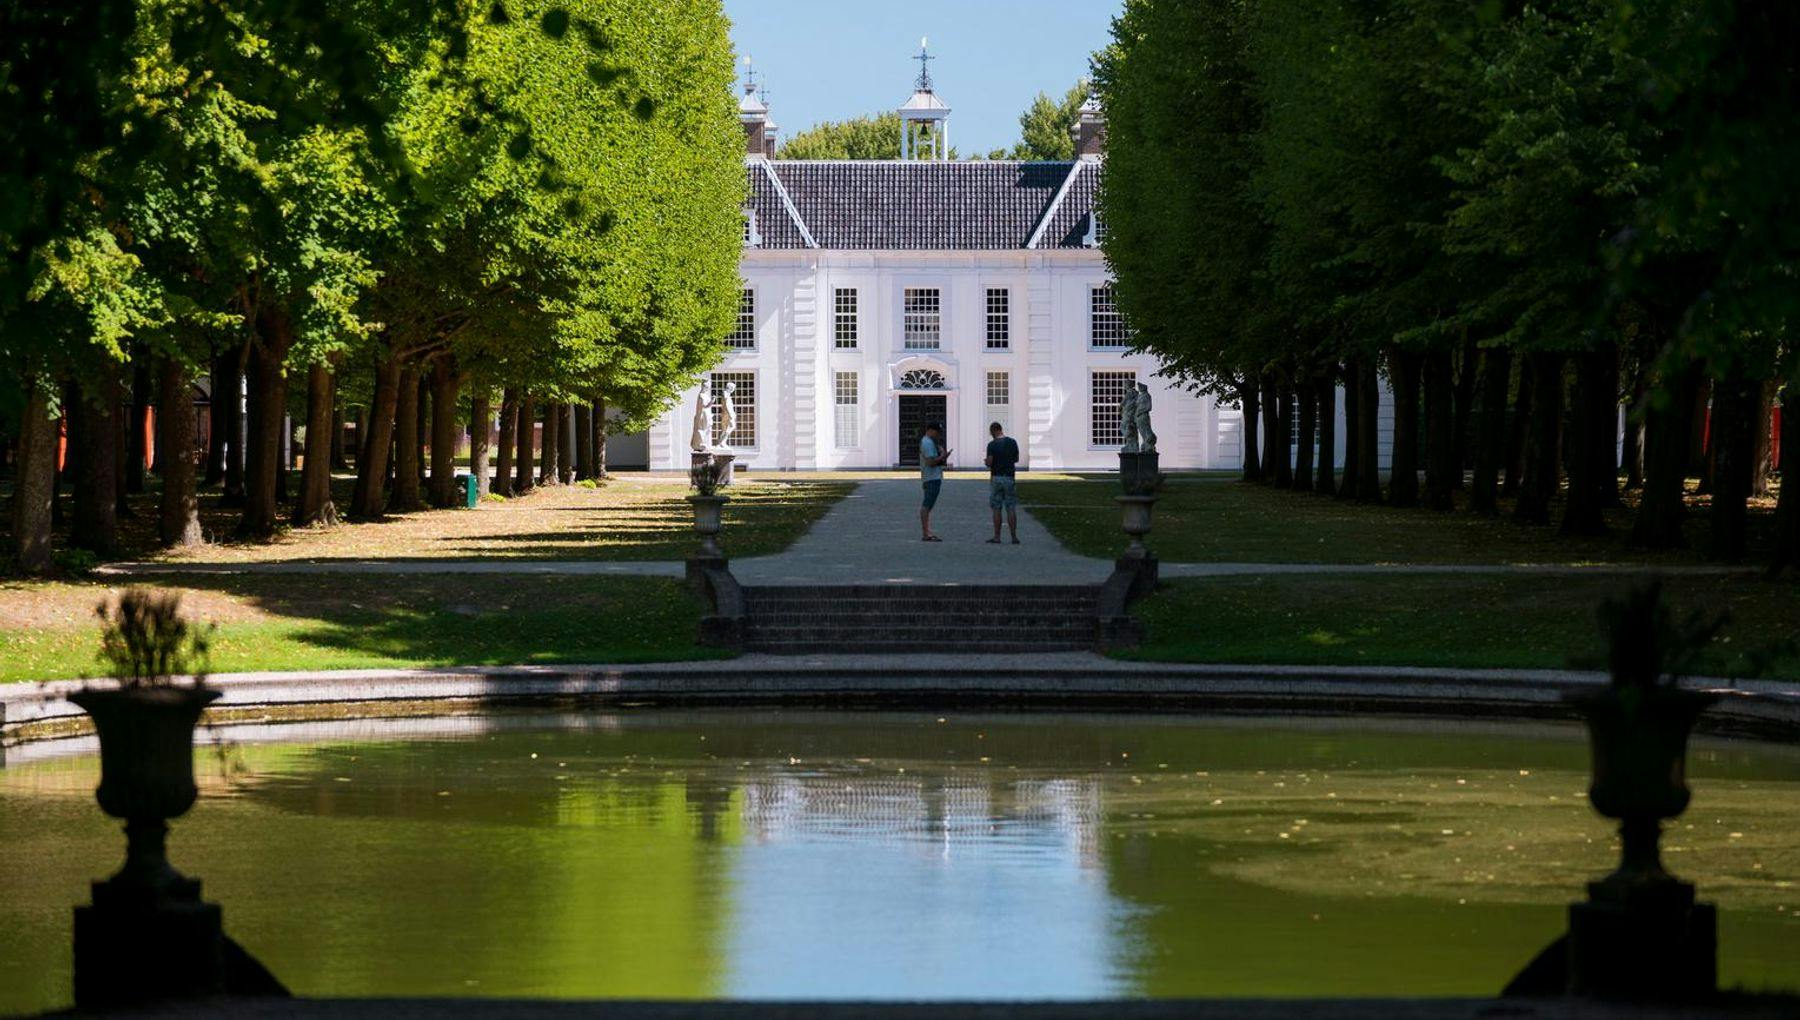 The pond of countryhouse Beeckestijn in Velsen-Zuid.